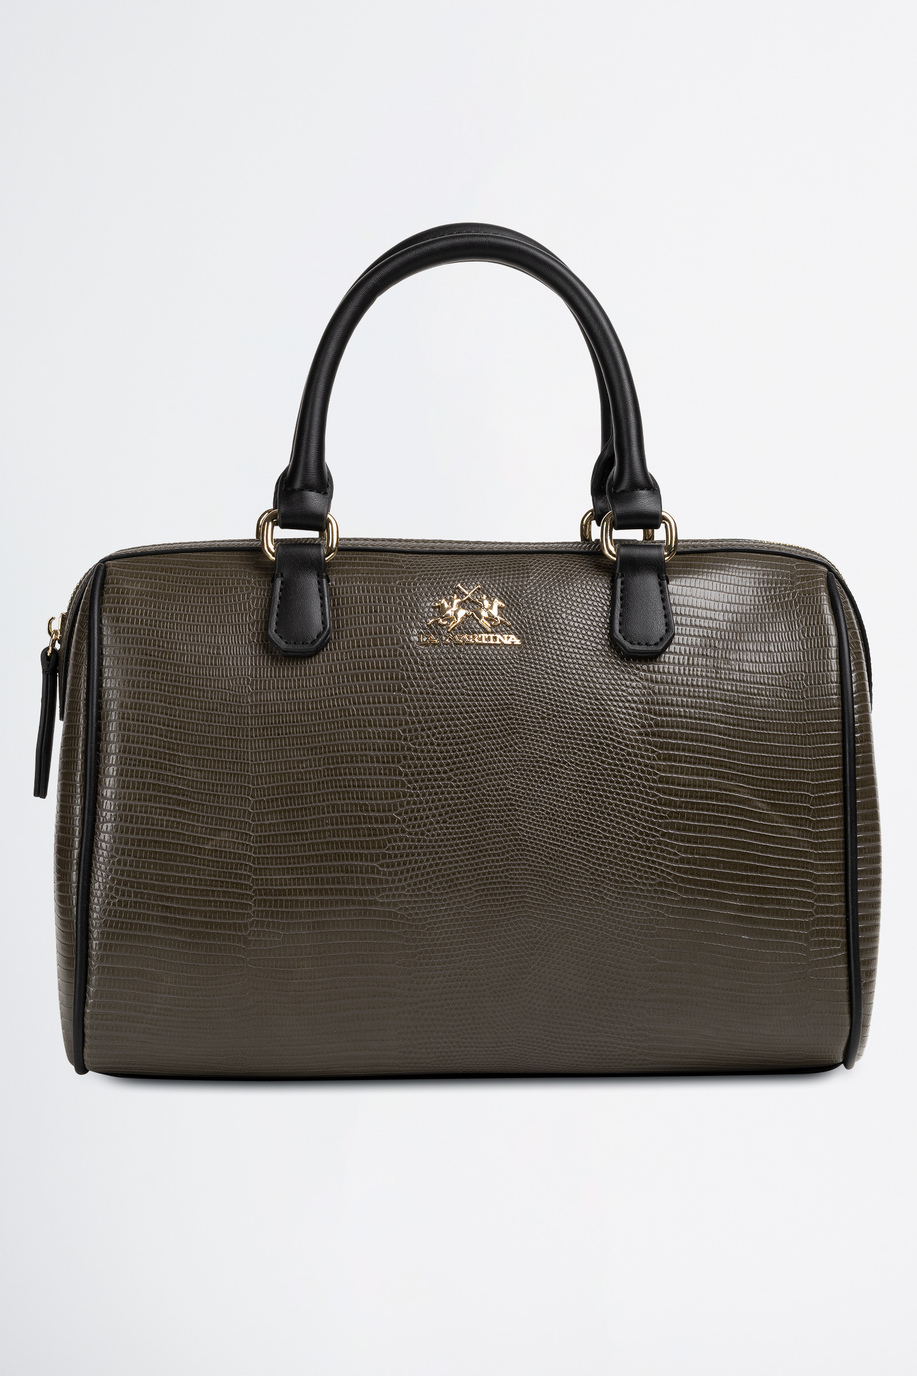 Double handle case in croco print - Accessories for her | La Martina - Official Online Shop